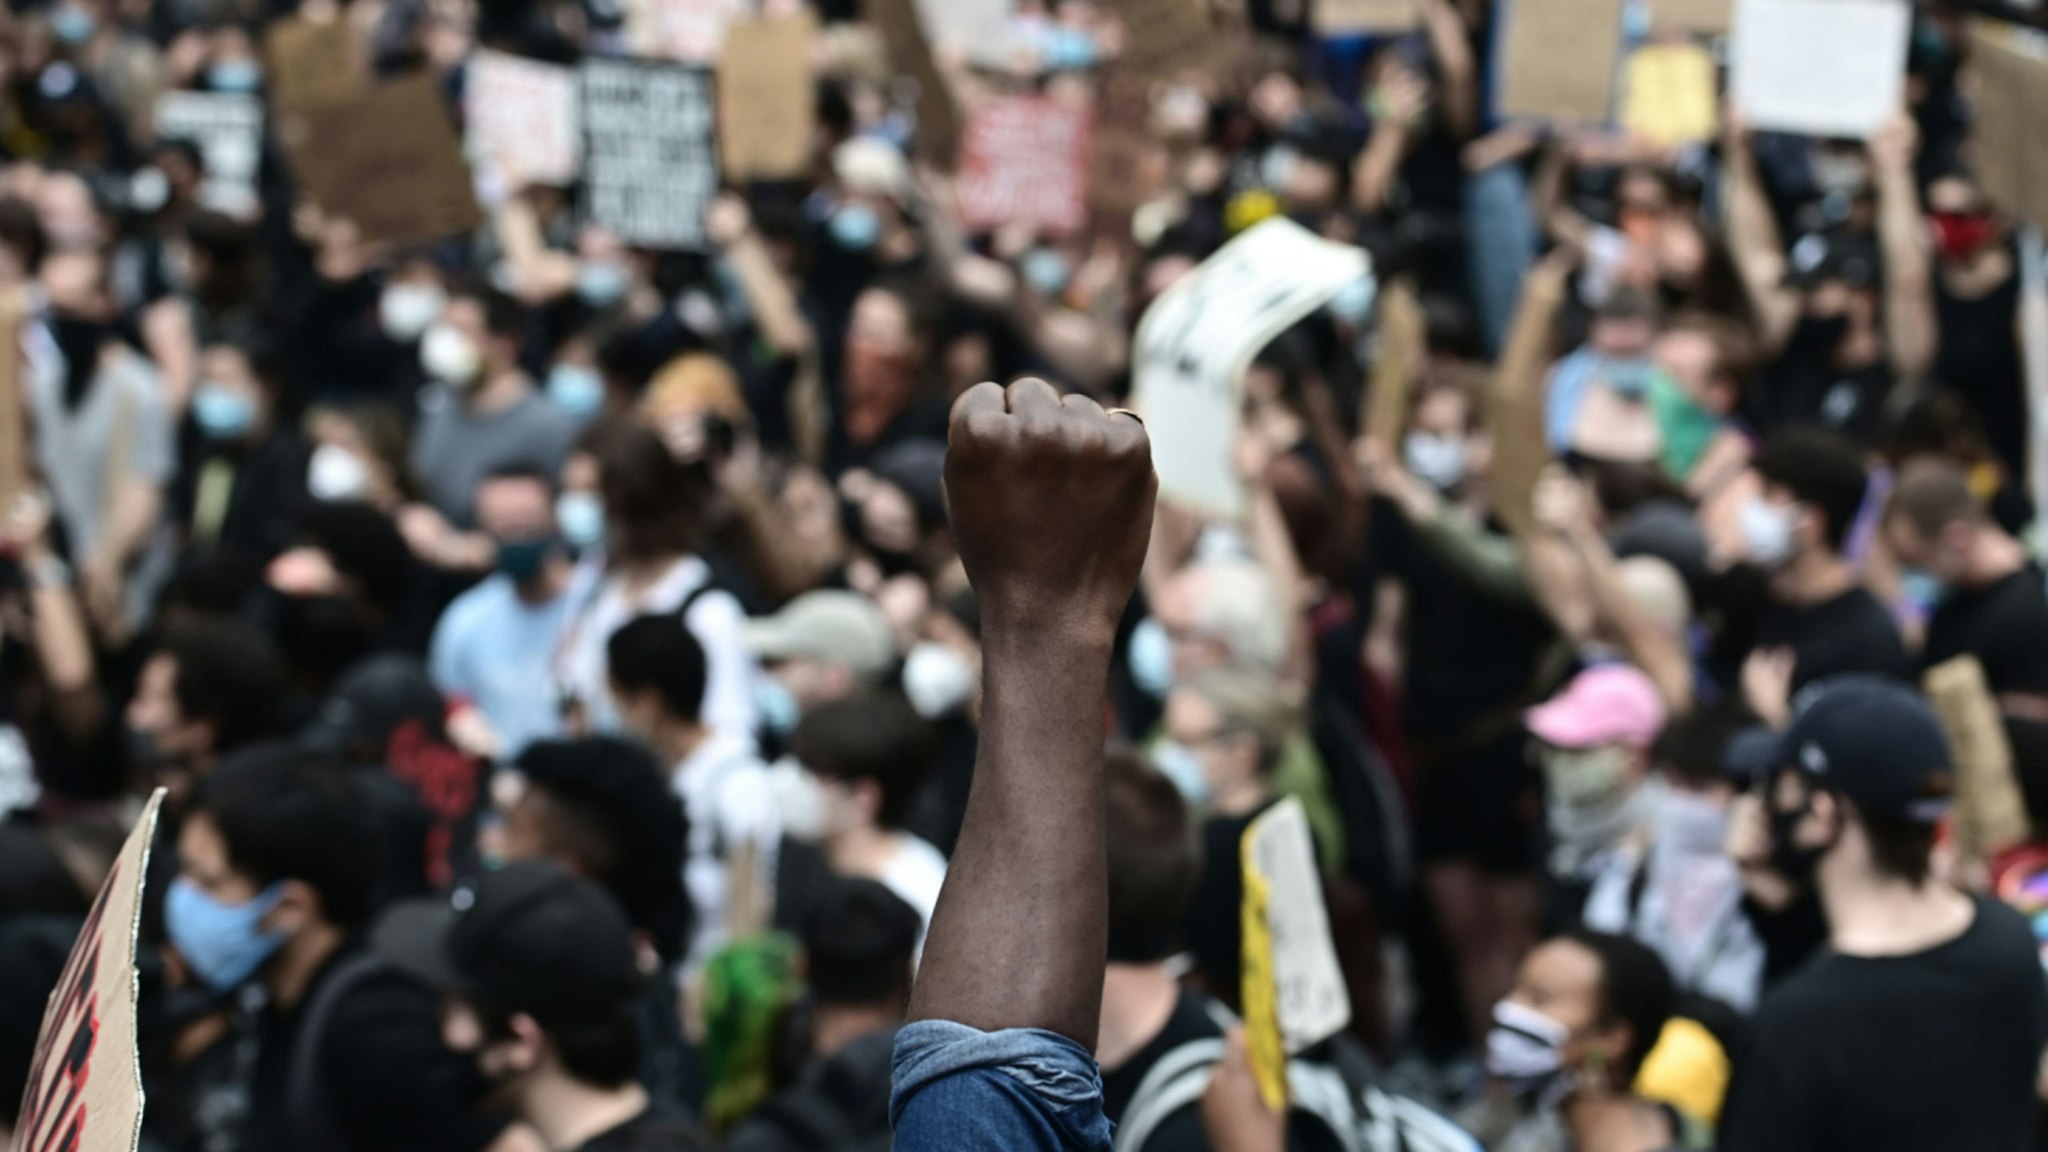 Protesters demonstrate on June 2, 2020, during a "Black Lives Matter" protest in New York City.